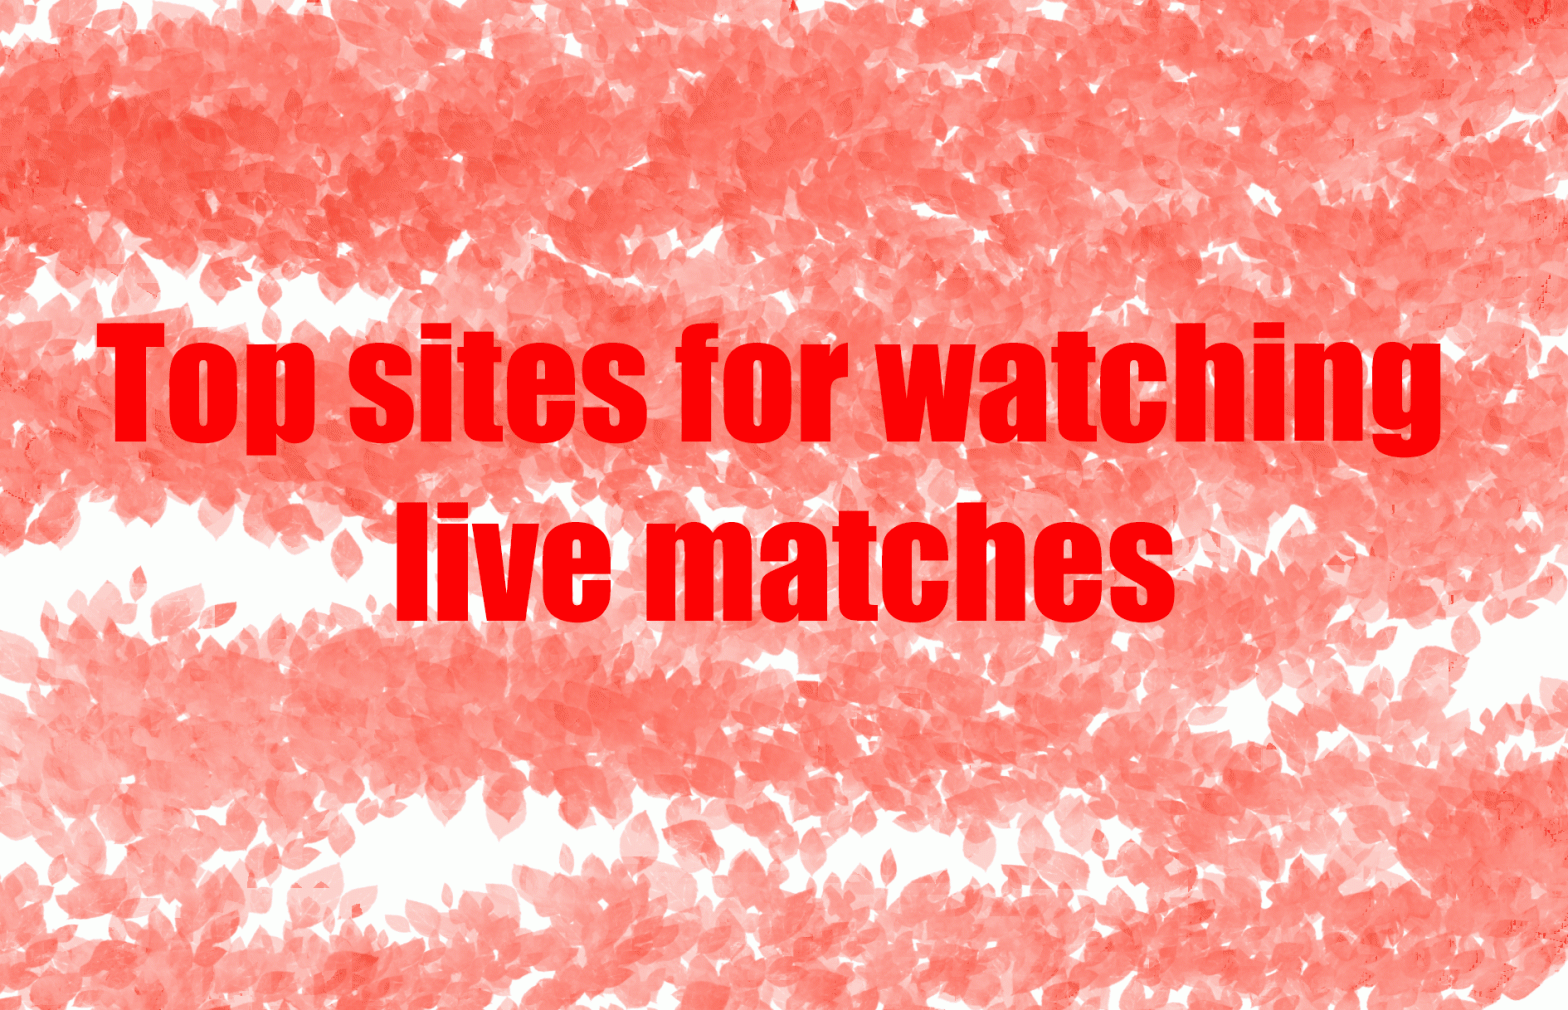 Here you can enjoy live cricket matches